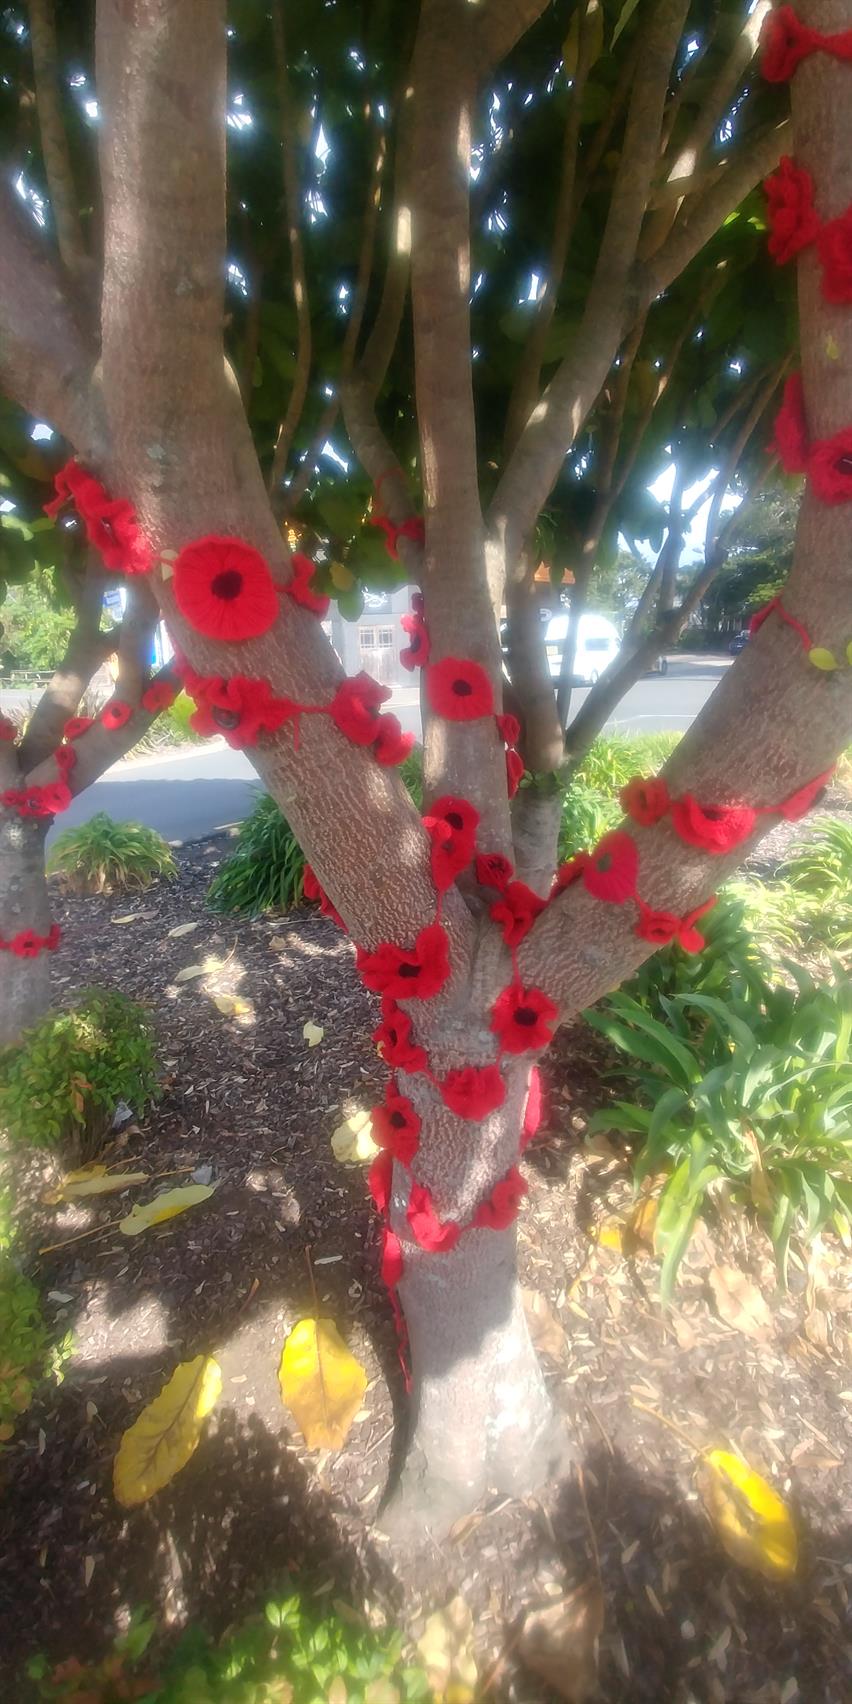 Raglan Poppy Tree 2018 - image supplied by Rodger Gallagher